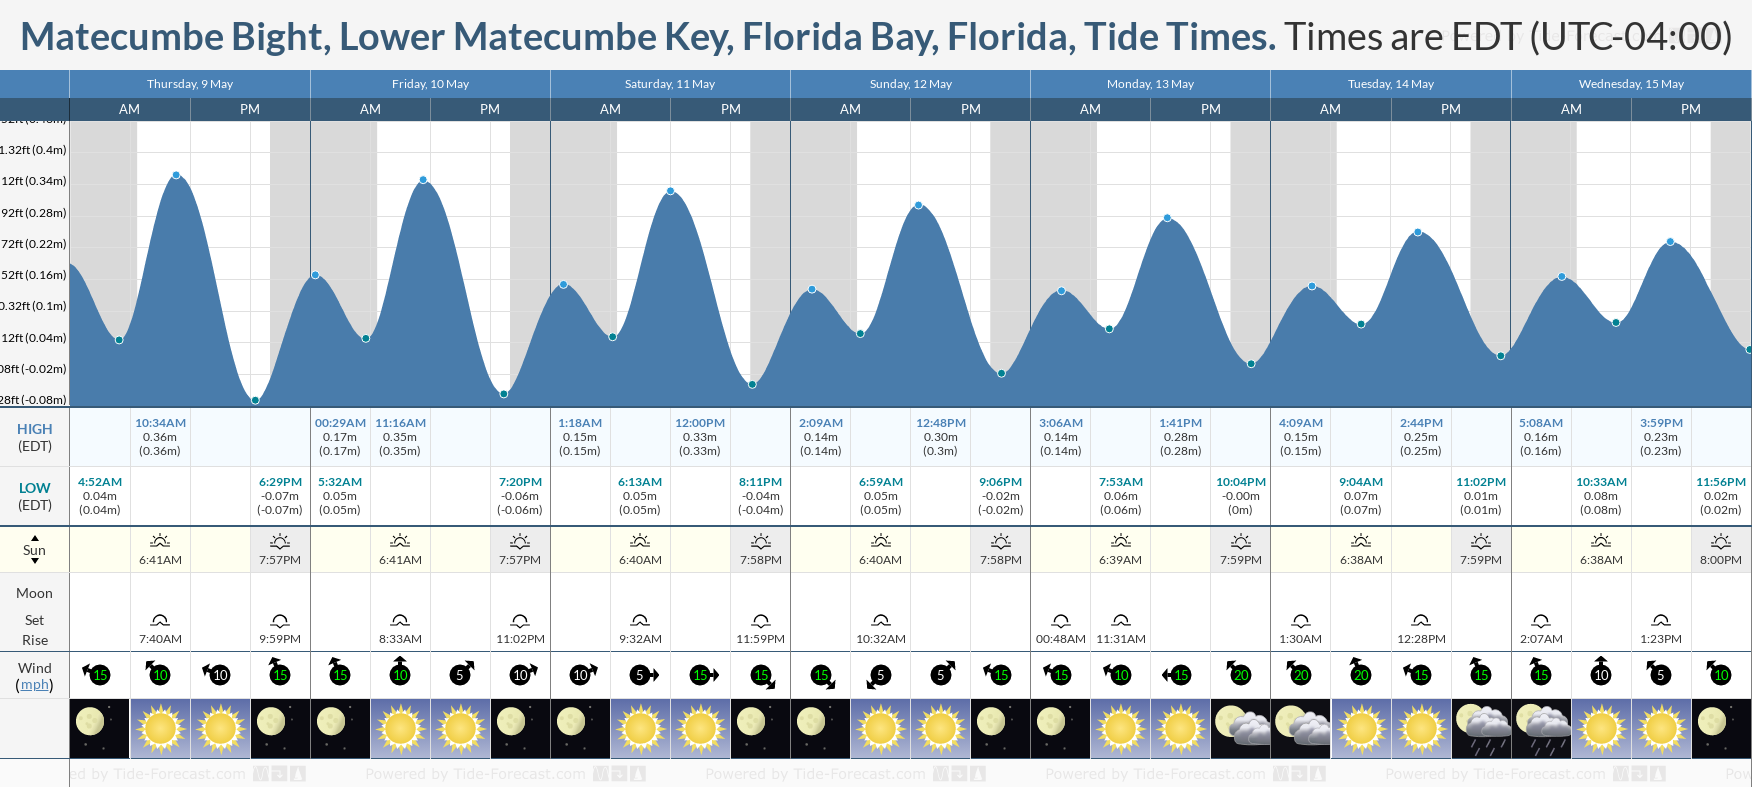 Matecumbe Bight, Lower Matecumbe Key, Florida Bay, Florida Tide Chart including high and low tide times for the next 7 days